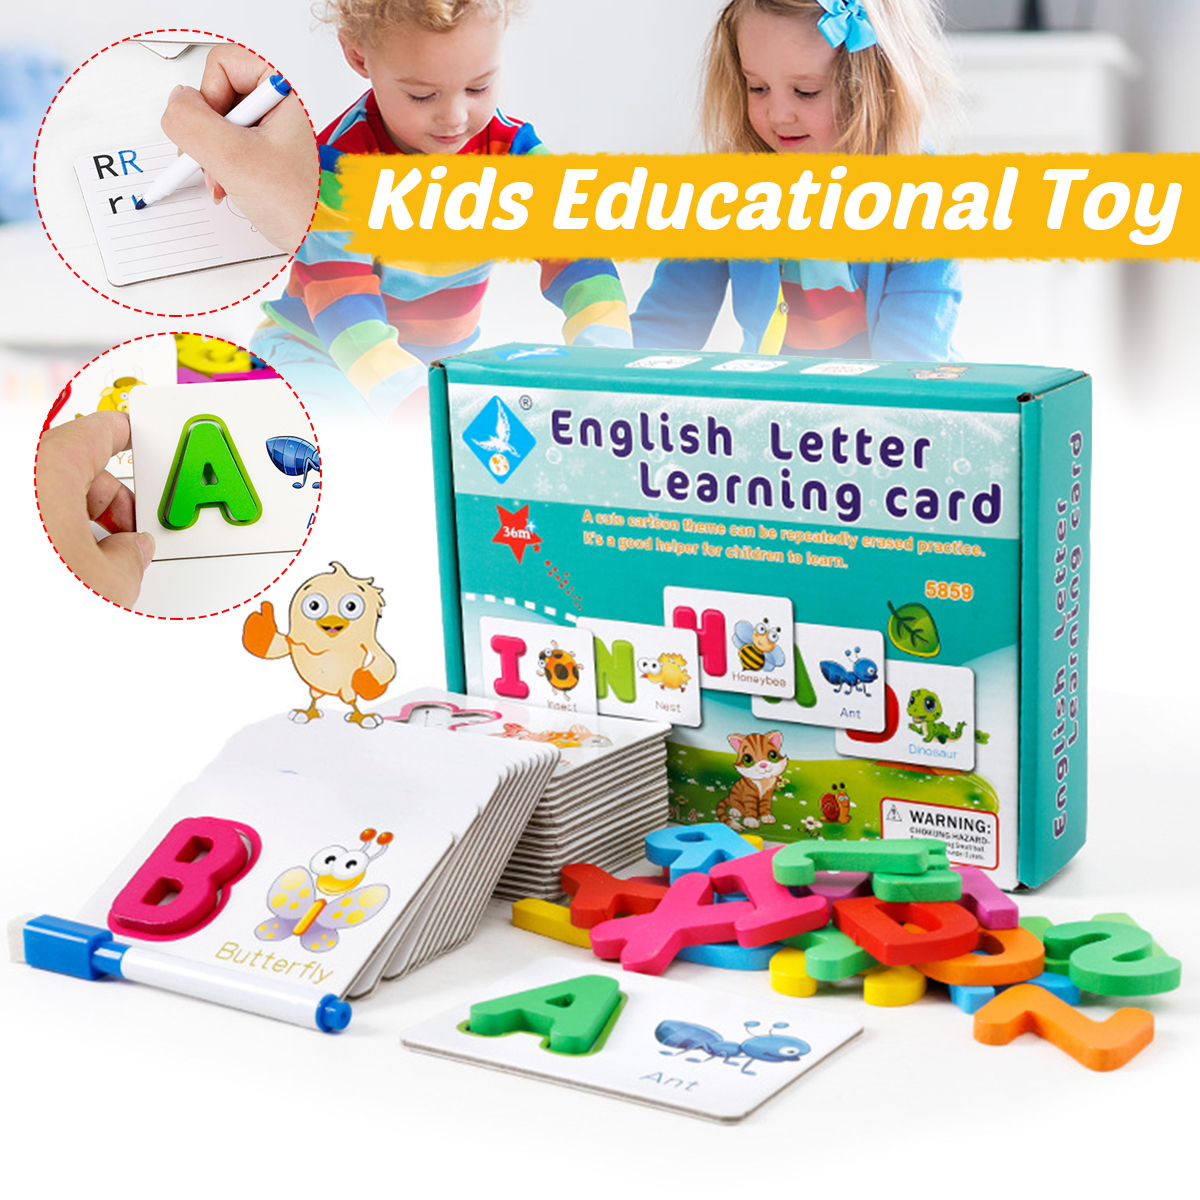 Puzzle-Alphabet-Spelling-English-Letters-Animal-Cards-Educational-Learning-Toy-for-Kids-Gift-1726968-1